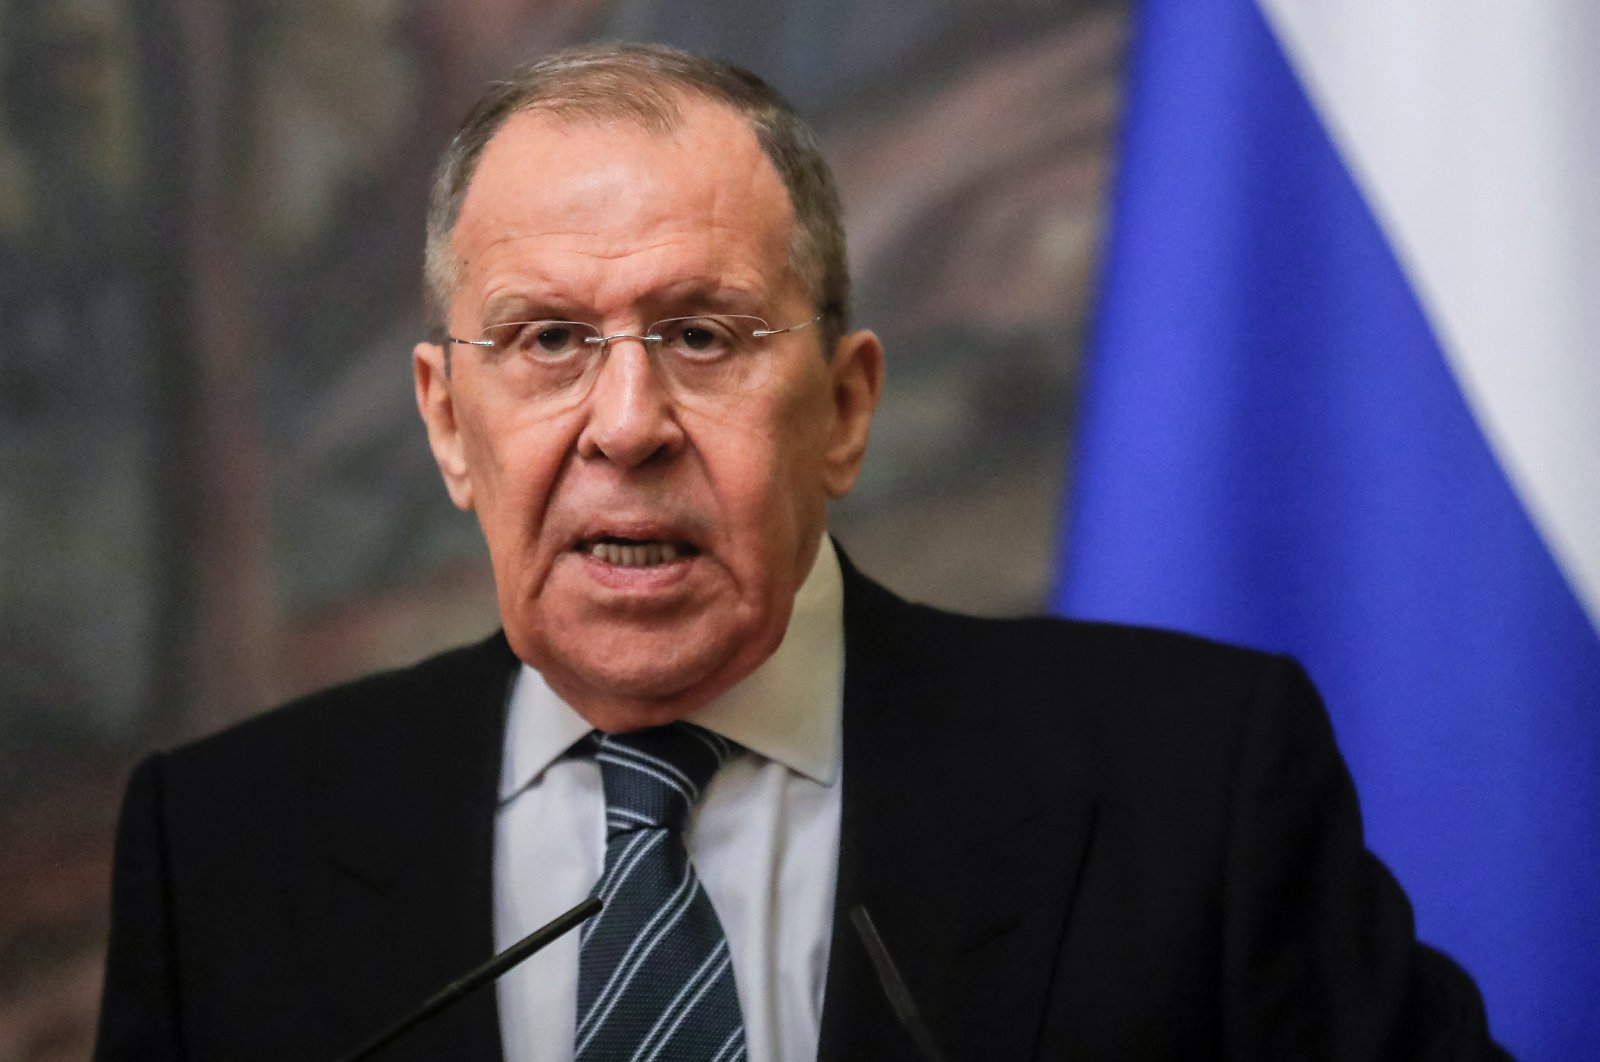 Russian Foreign Minister Sergei Lavrov attends a news conference following talks with his Egyptian counterpart Sameh Shoukry in Moscow, Russia, Jan. 31, 2023. (Reuters Photo)